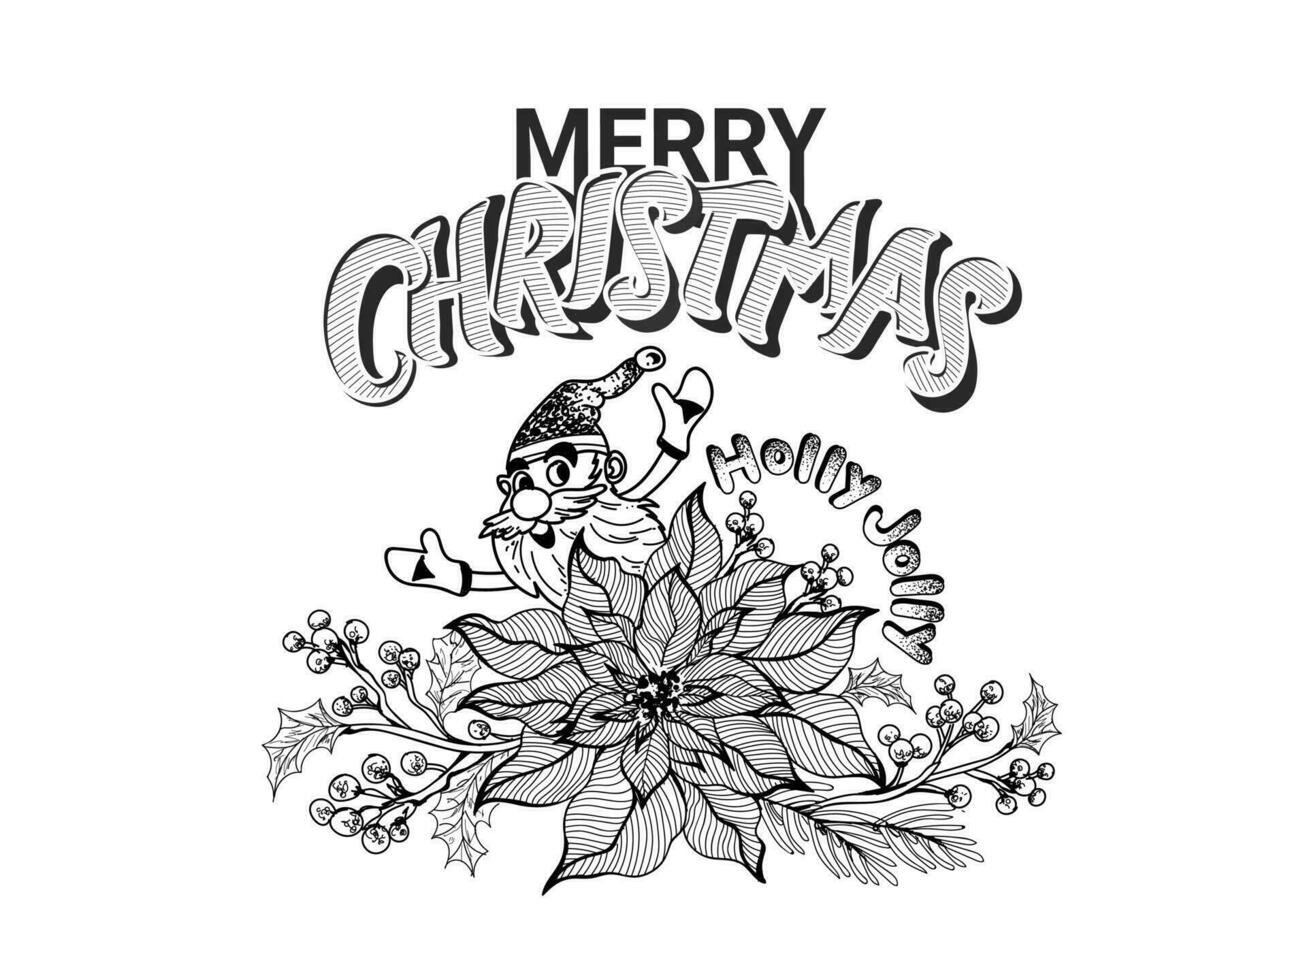 Doodle Style Cheerful Santa Claus with Poinsettia Flower, Xmas Leaves and Berry Branches on White Background for Holly Jolly Merry Christmas Celebration. vector